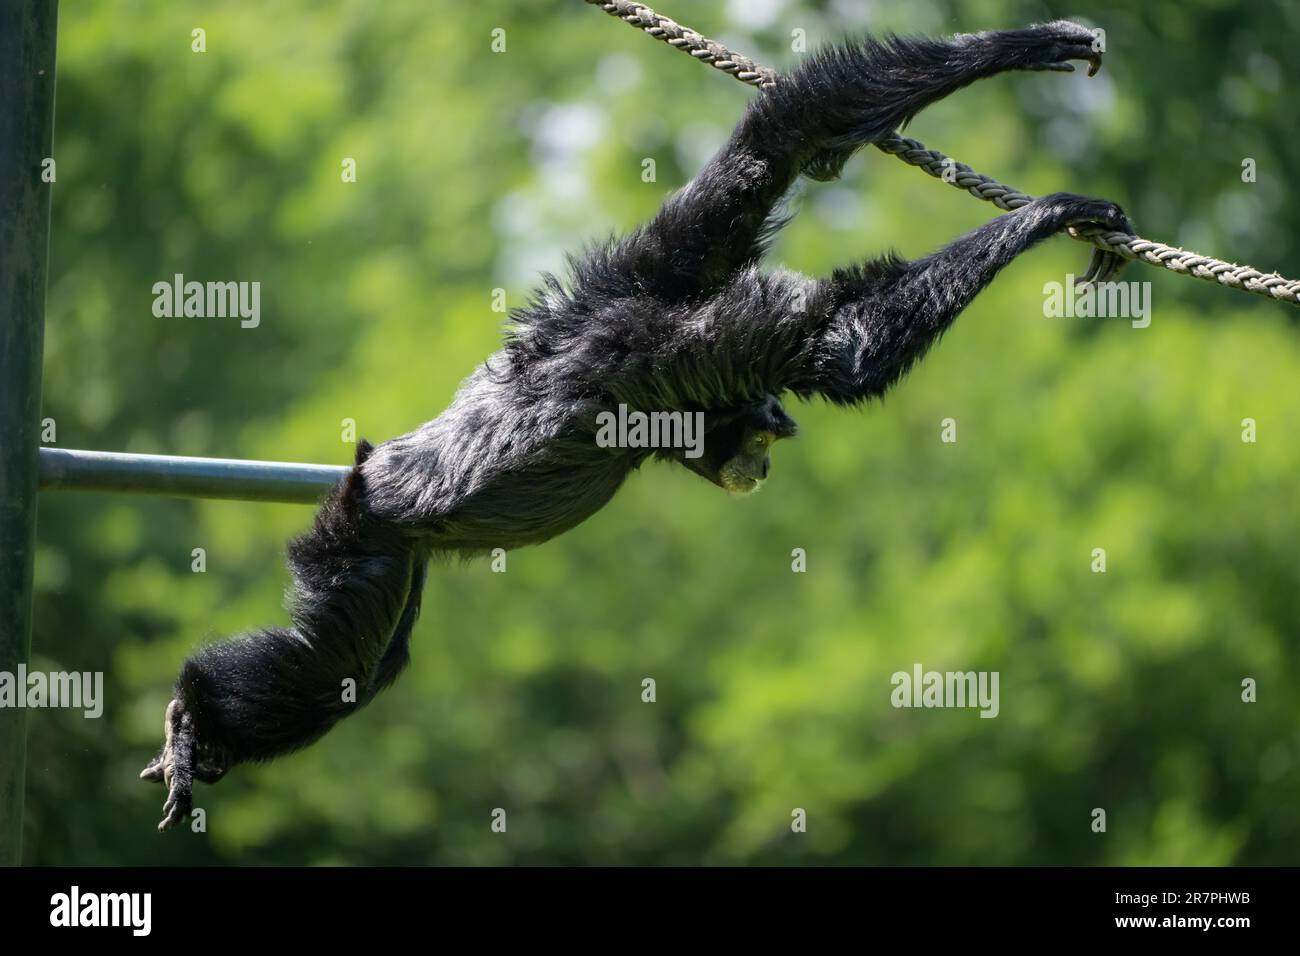 An adorable monkey swinging from a rope in a tropical forest setting, full of lush green vegetation Stock Photo